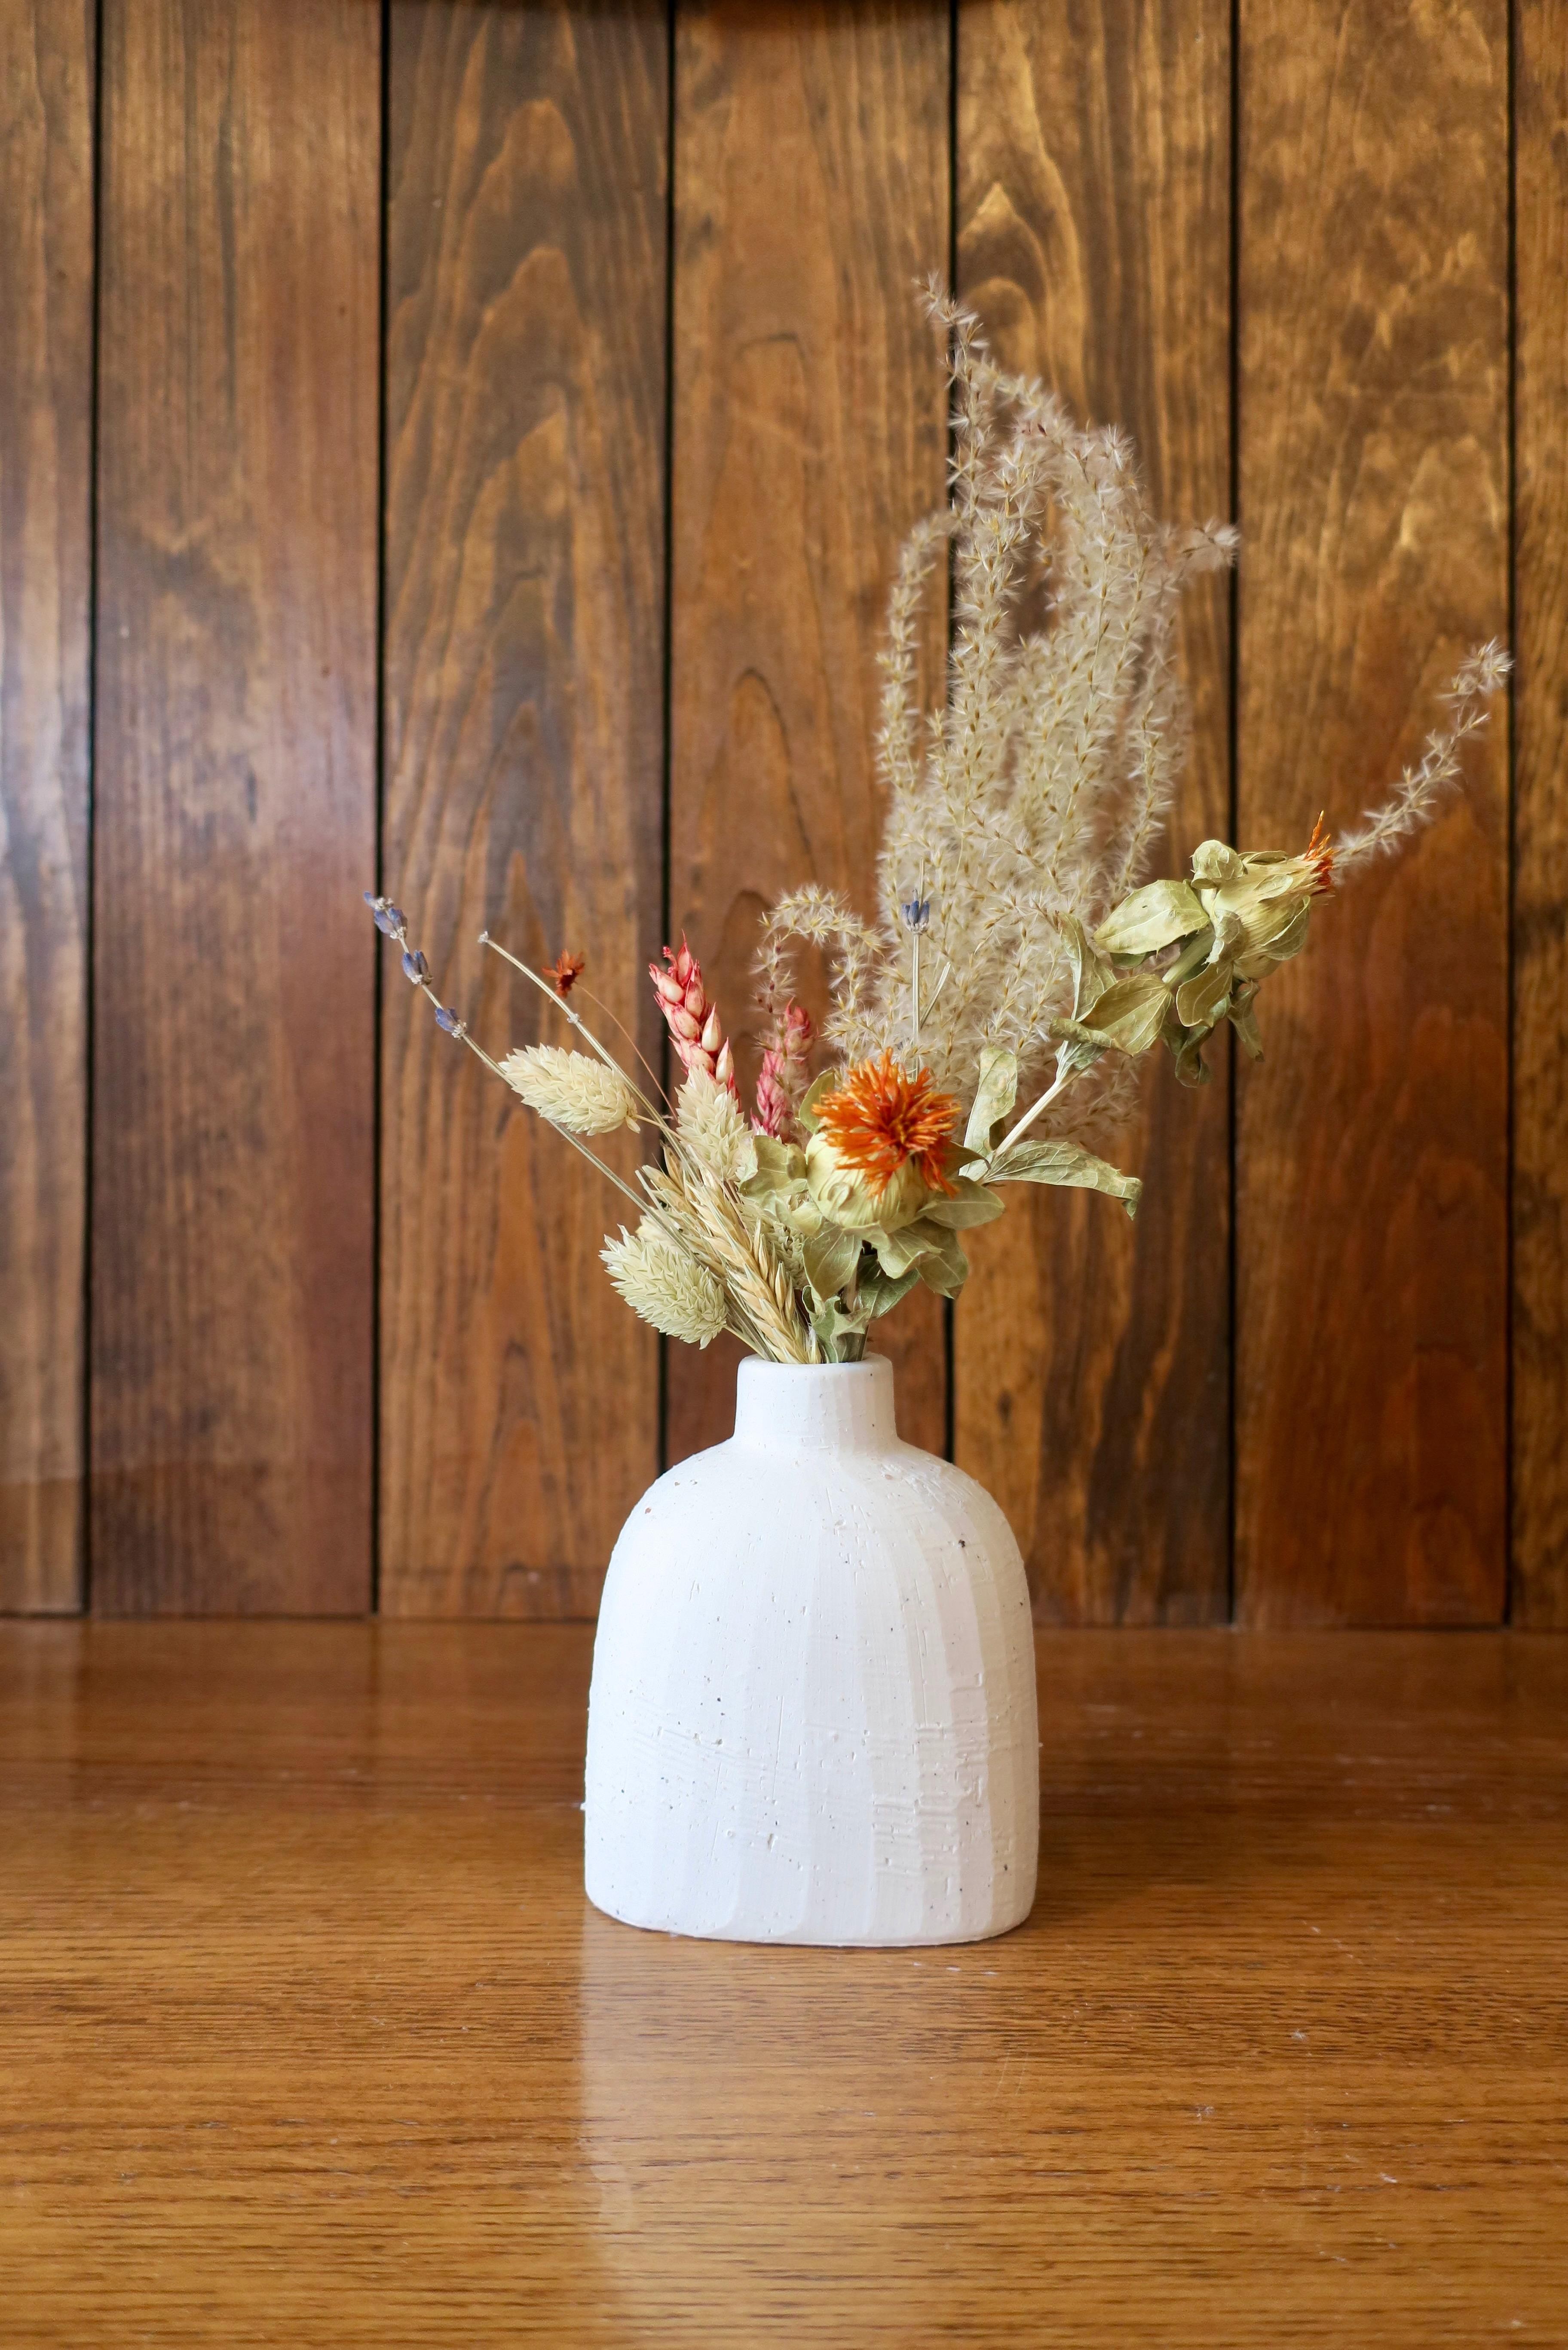 Everlasting Blooms from Nomon